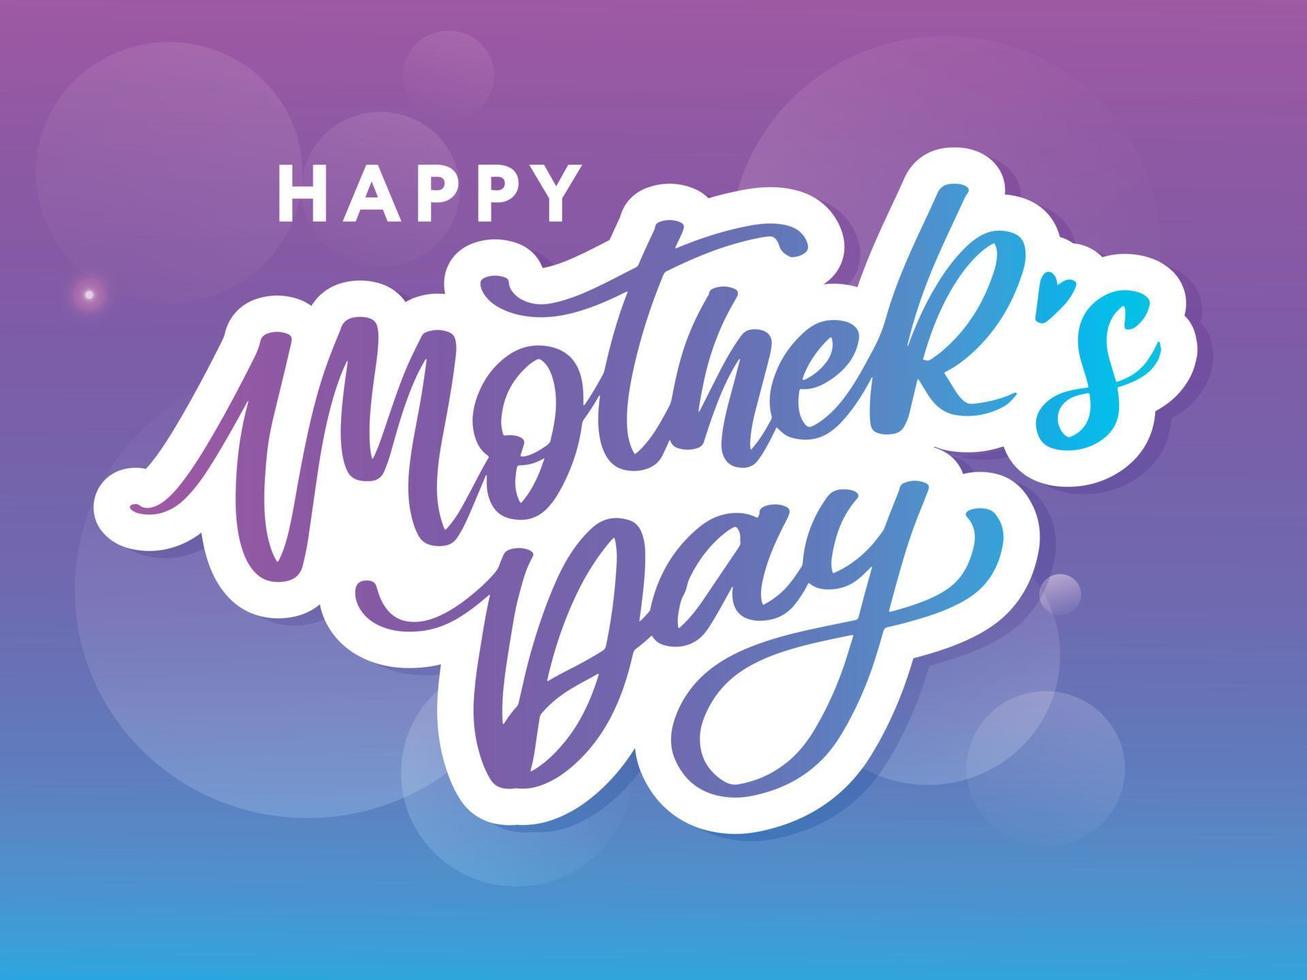 Happy Mothers Day lettering. Handmade calligraphy vector illustration. Mother's day card with flowers